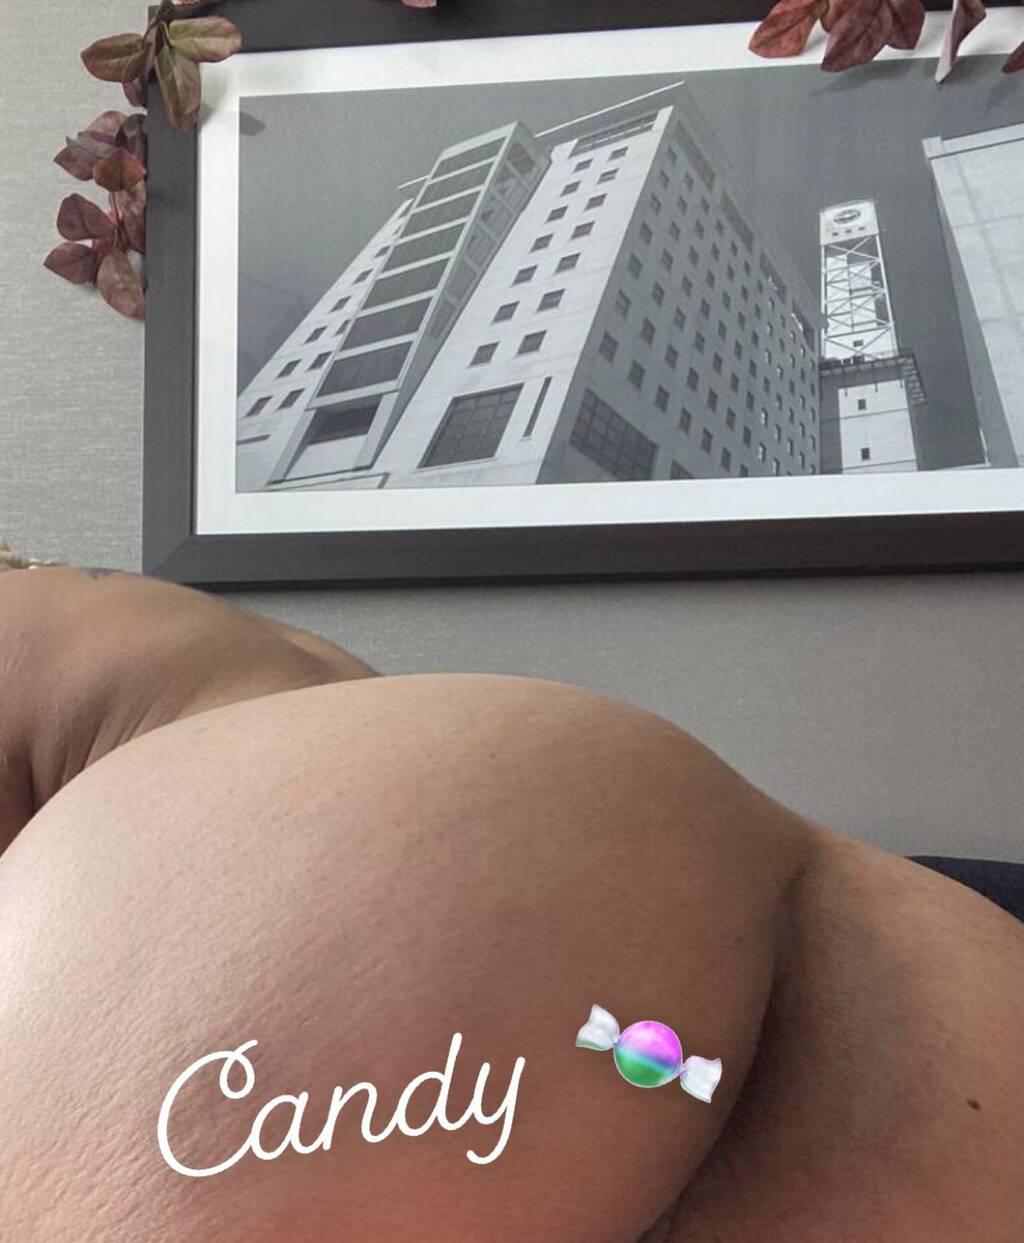 SWEET LIKE CANDY ;) Cum Play With Me